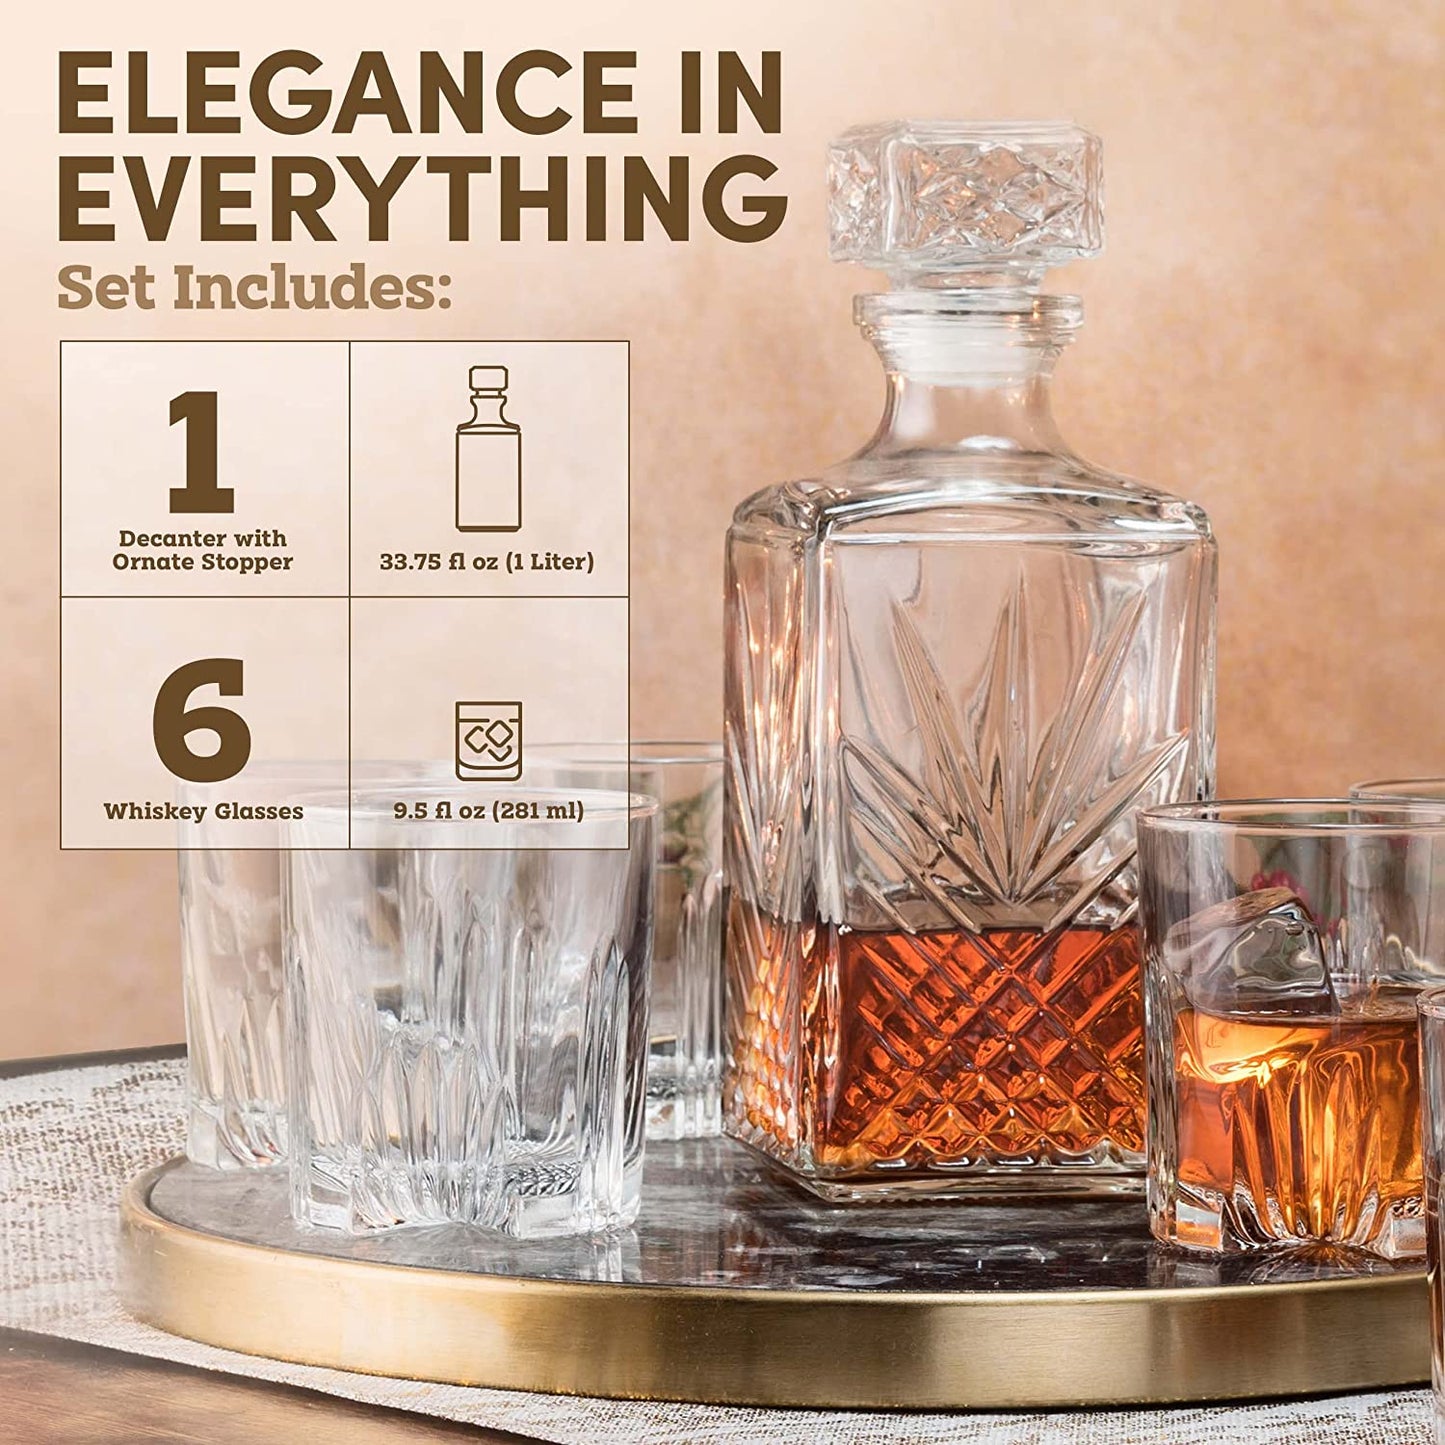 Whiskey Decanter Set - 7-Piece Italian Crafted Glass Decanter & Whiskey Glasses Set - Holiday Whiskey Gifts for Men and Women W/Ornate Stopper and 6 Cocktail Glasses